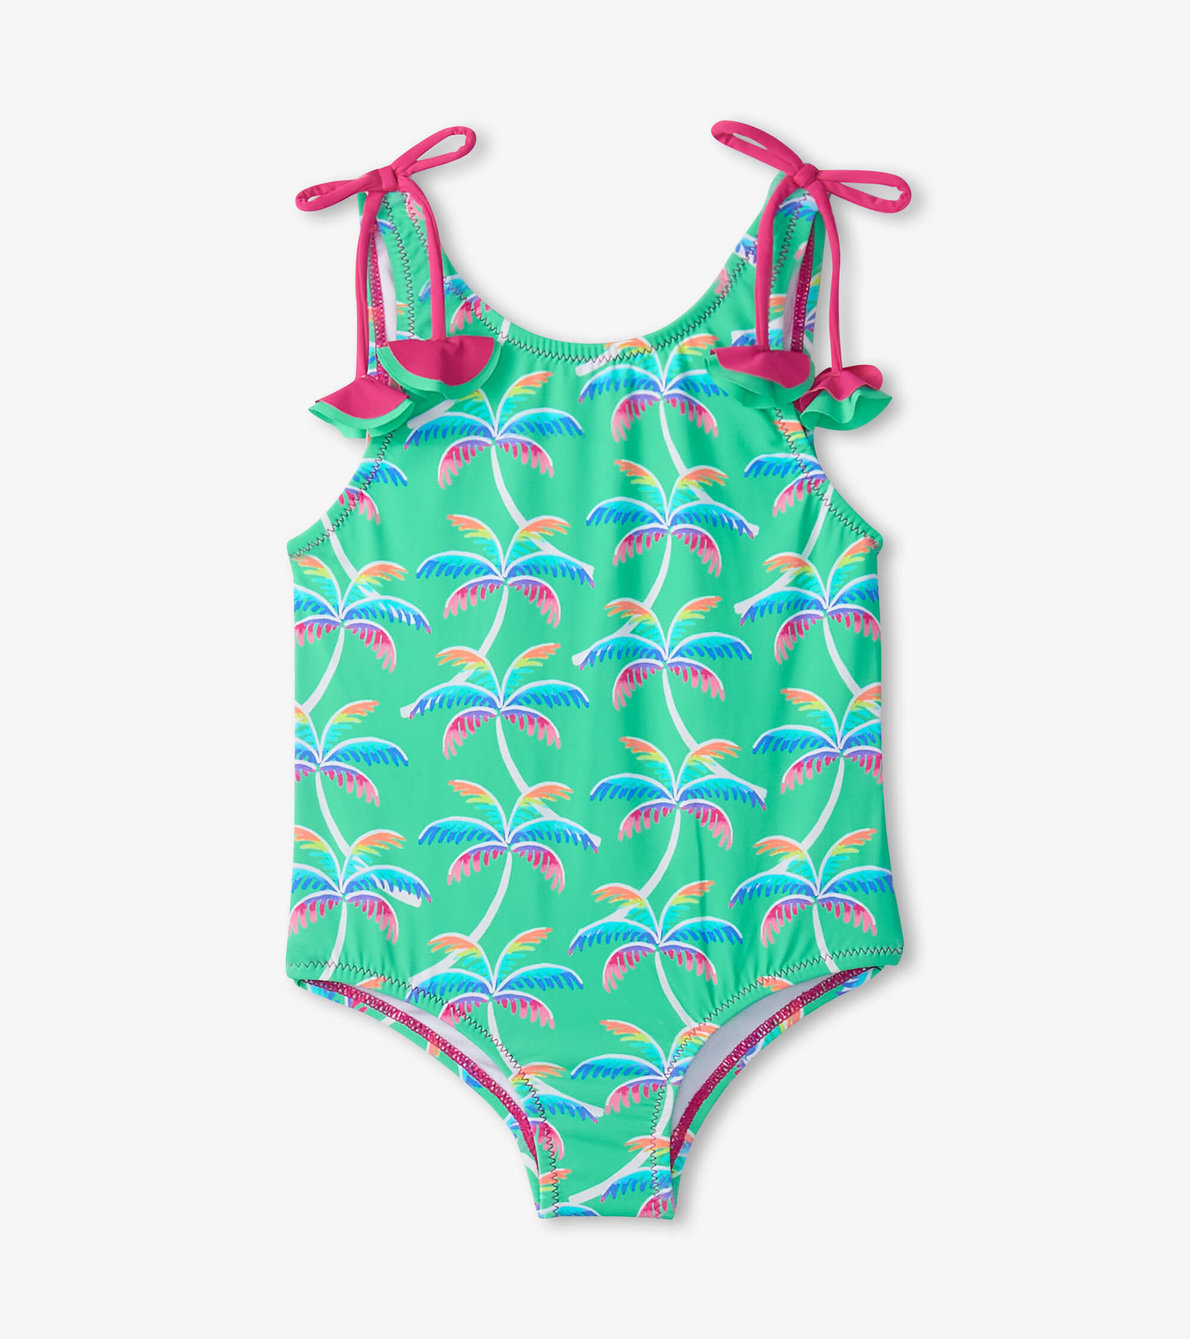 View larger image of Girls Rainbow Palm Shoulder Shoulder Bow Swimsuit